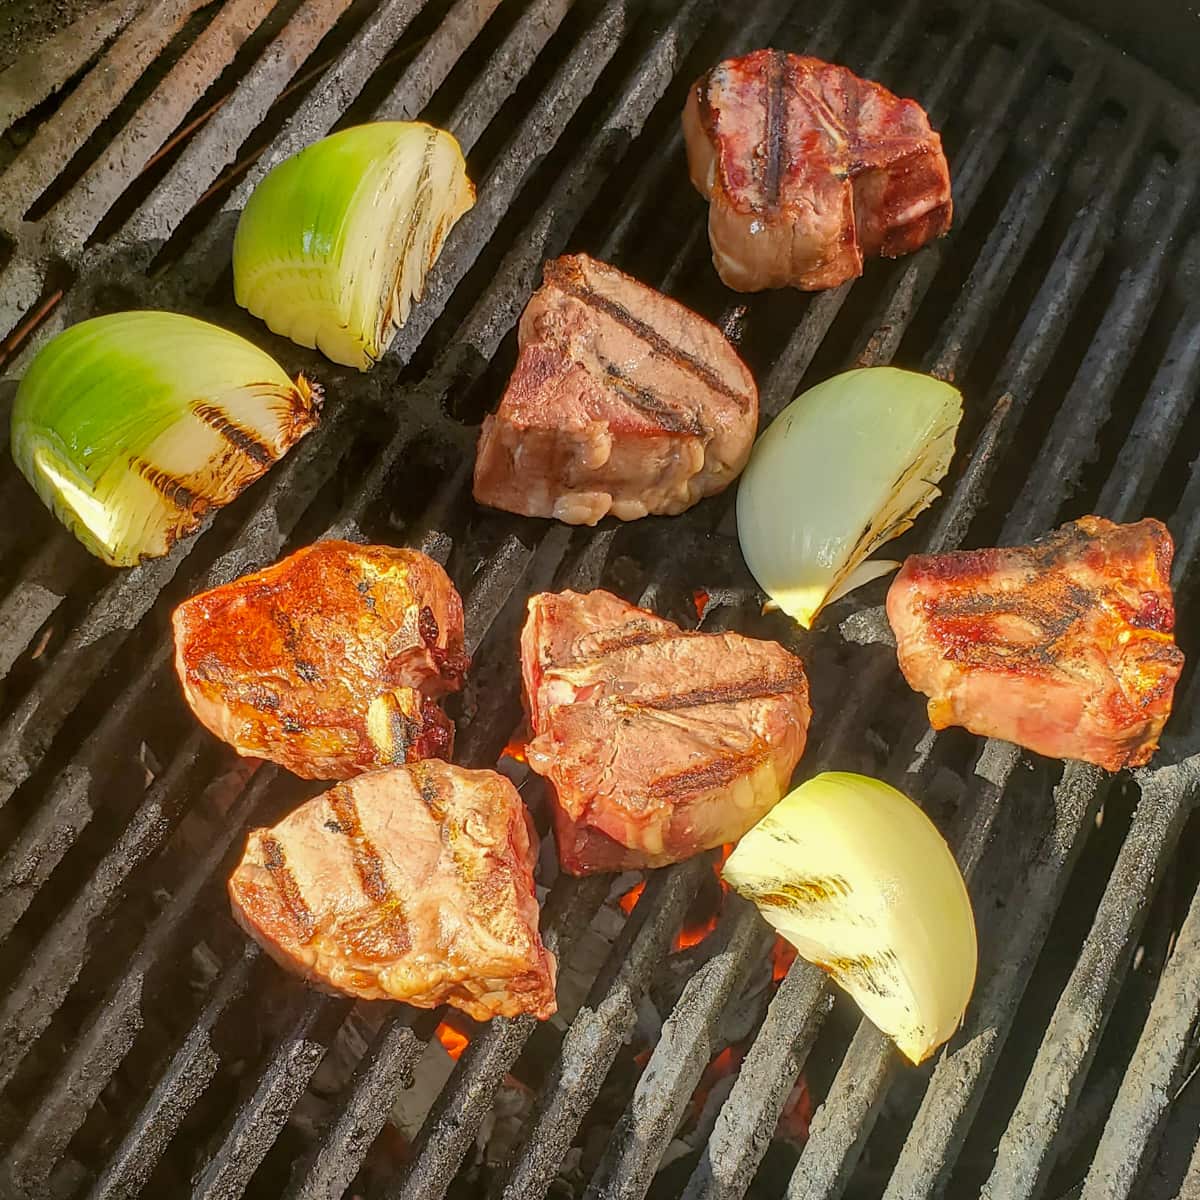 Onions and lamb chops cooking on a grill.